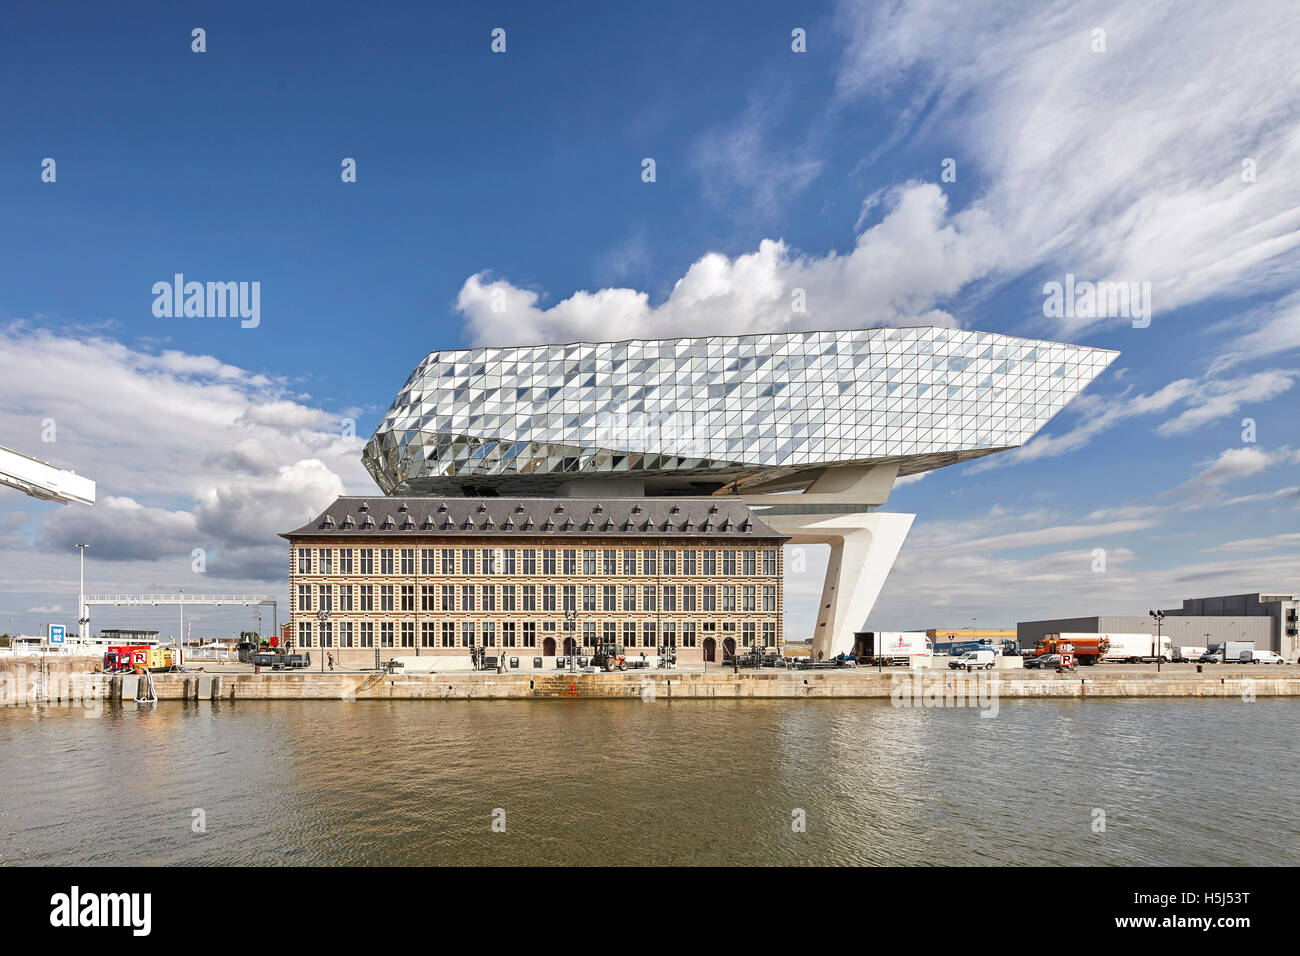 Frontal view of old and new across waterside. Port House, Antwerp, Belgium. Architect: Zaha Hadid Architects, 2016. Stock Photo